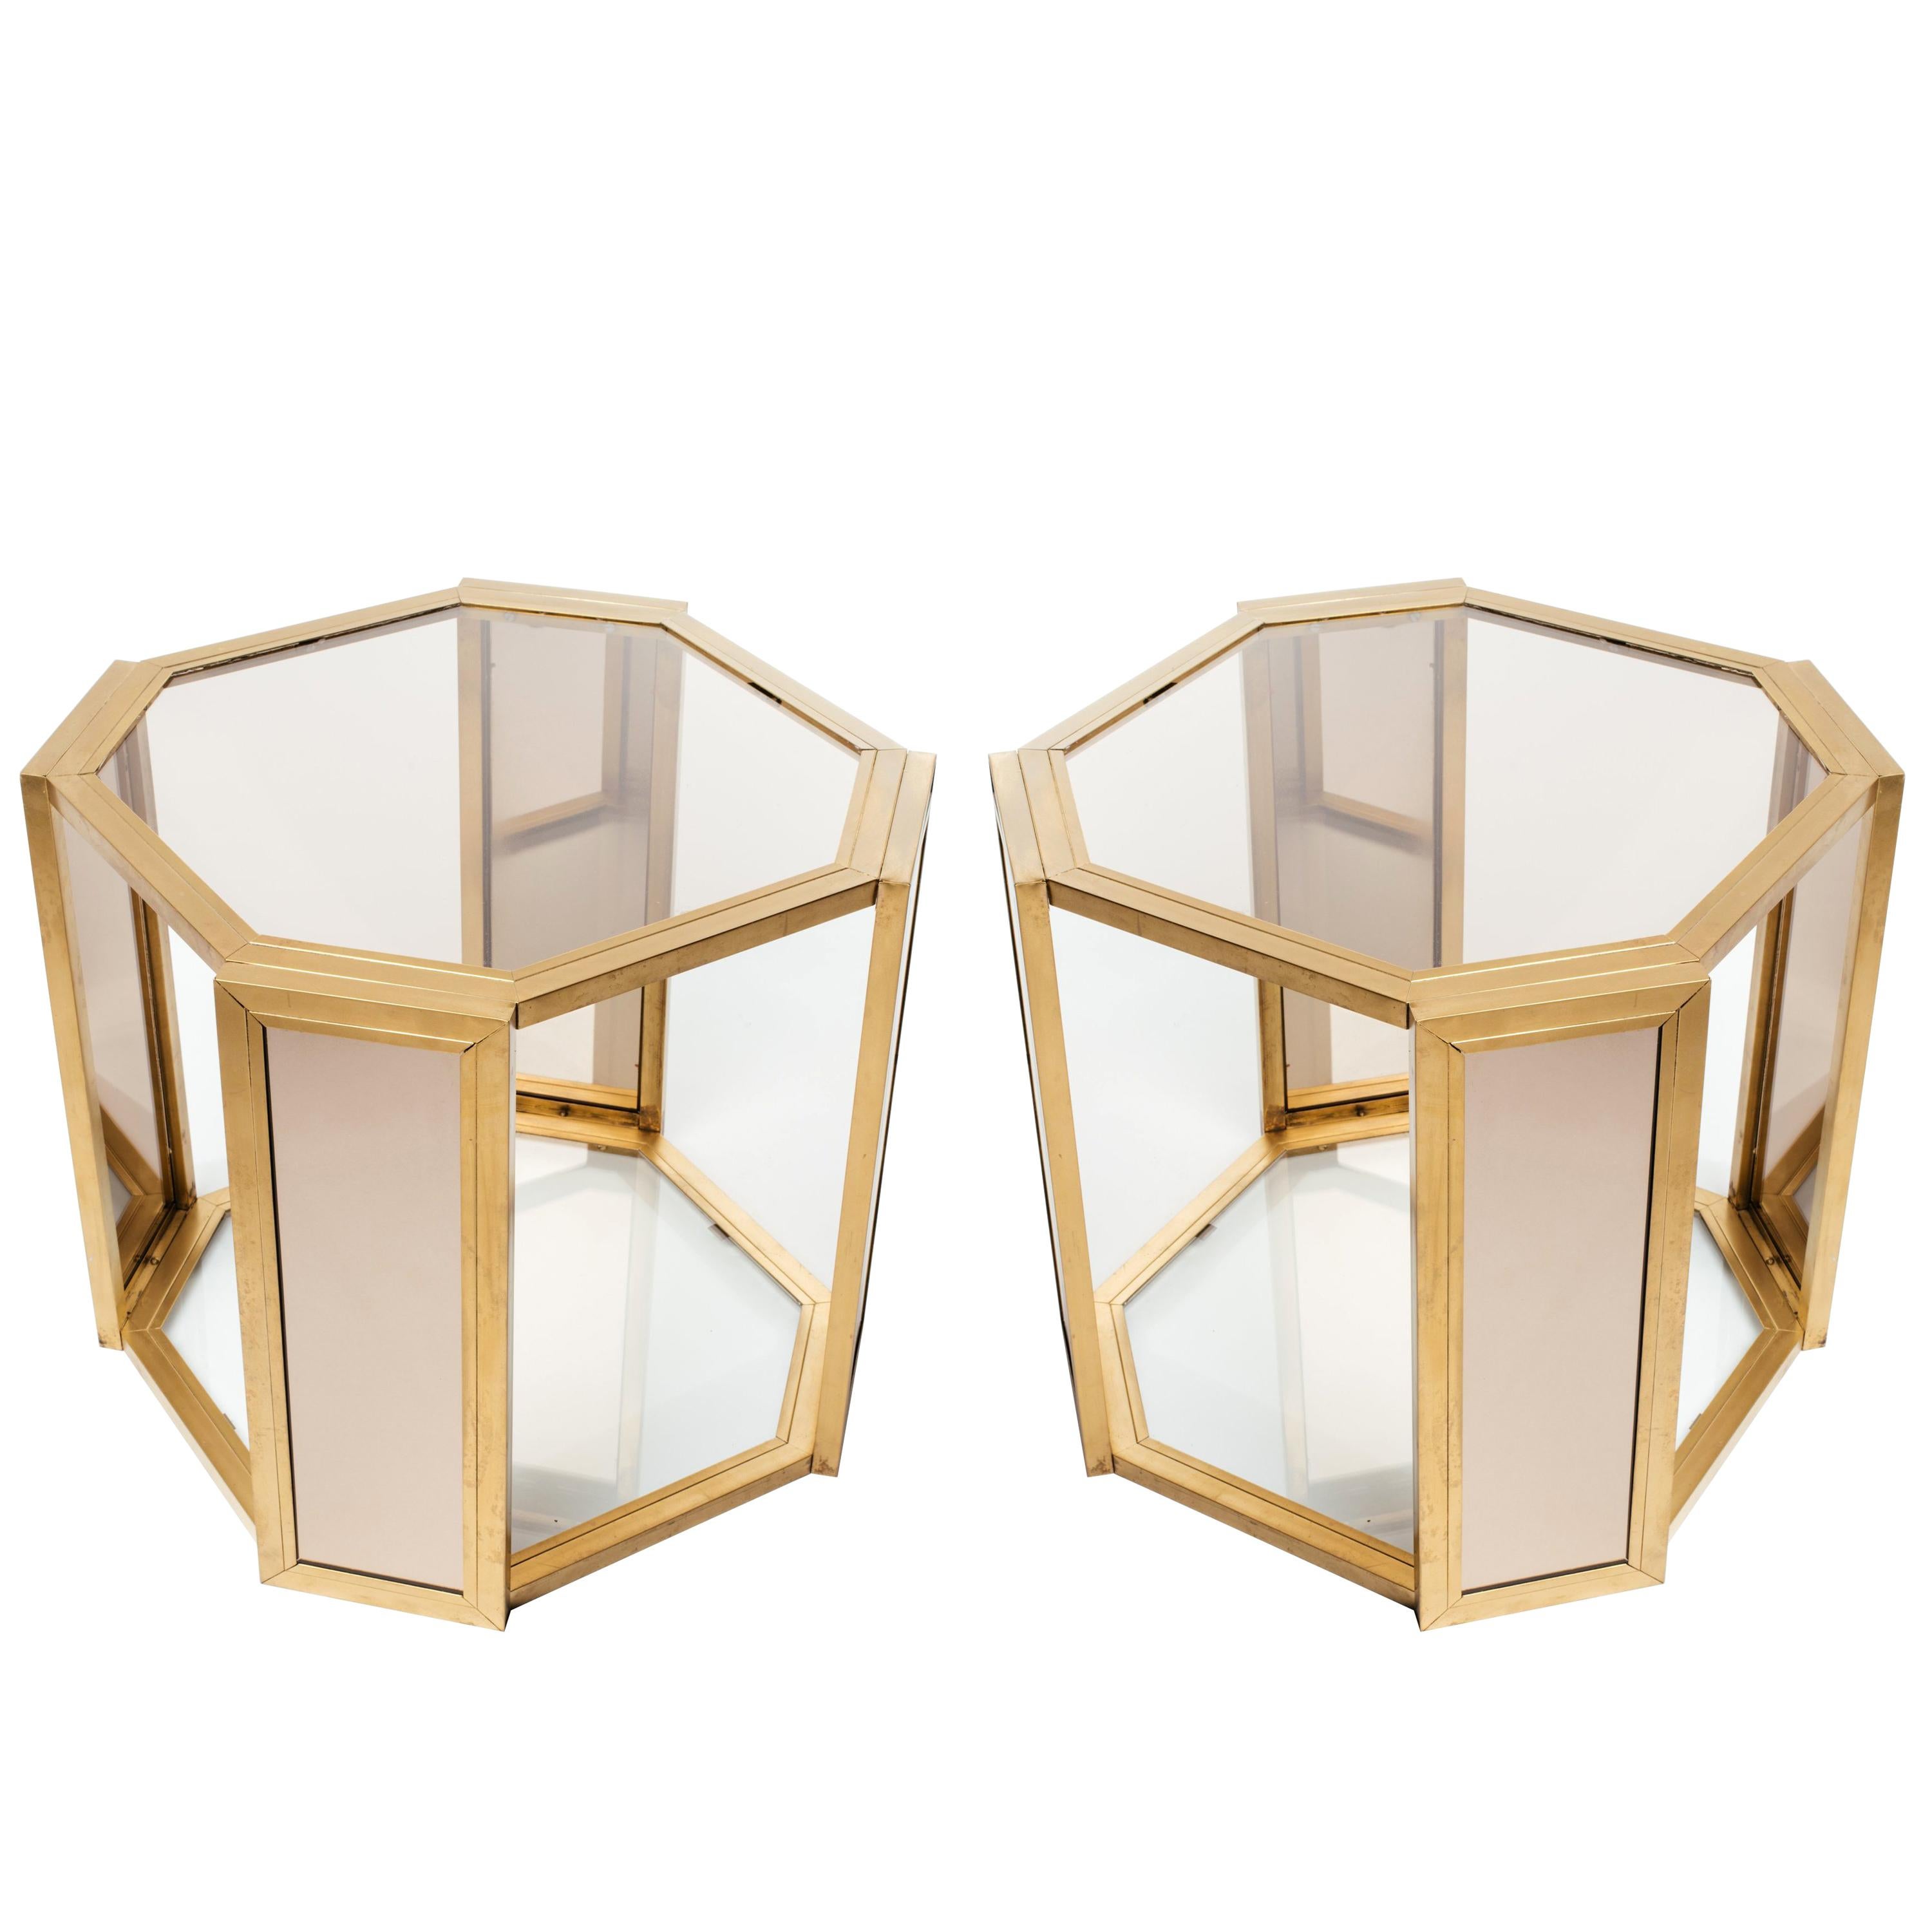 Pair of Mid-Century Modern two tier side tables with hexagonal forms. These chic end tables are comprised of dark brass metal frames with smoked glass tops and bronze mirrored insets on all legs.